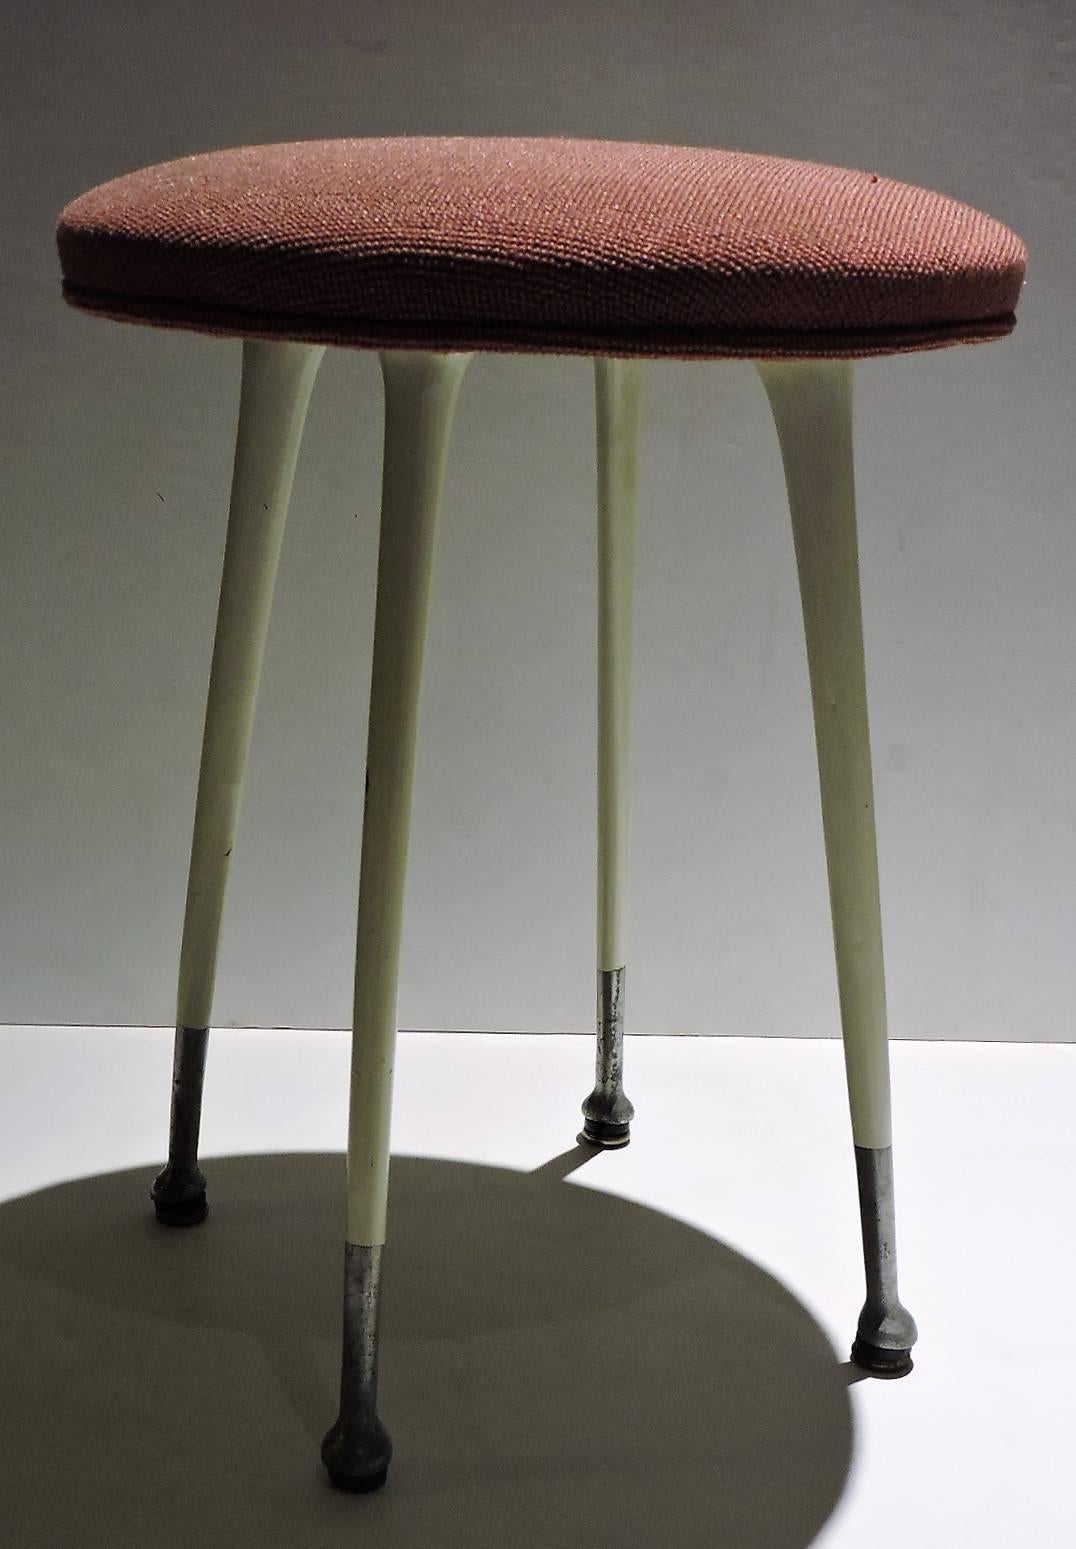 Gazelle Stool by Shelby Williams 2